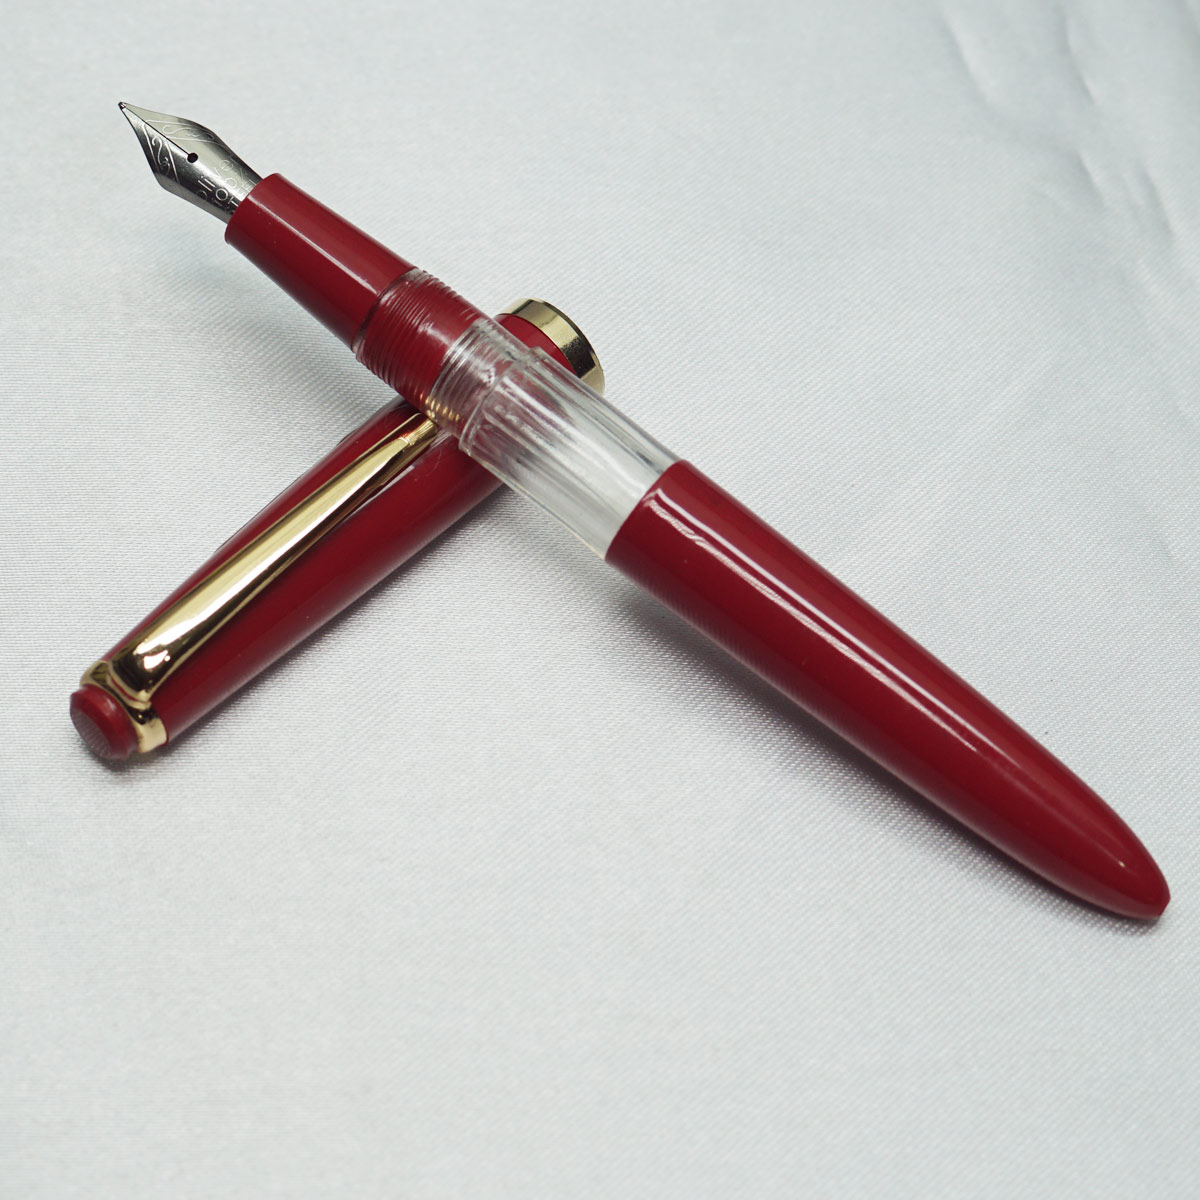 Oliver 11 Red Color Pattern Window Design Body With Gold Clip Fine Nib Eyedropper Type Fountain Pen SKU 22124